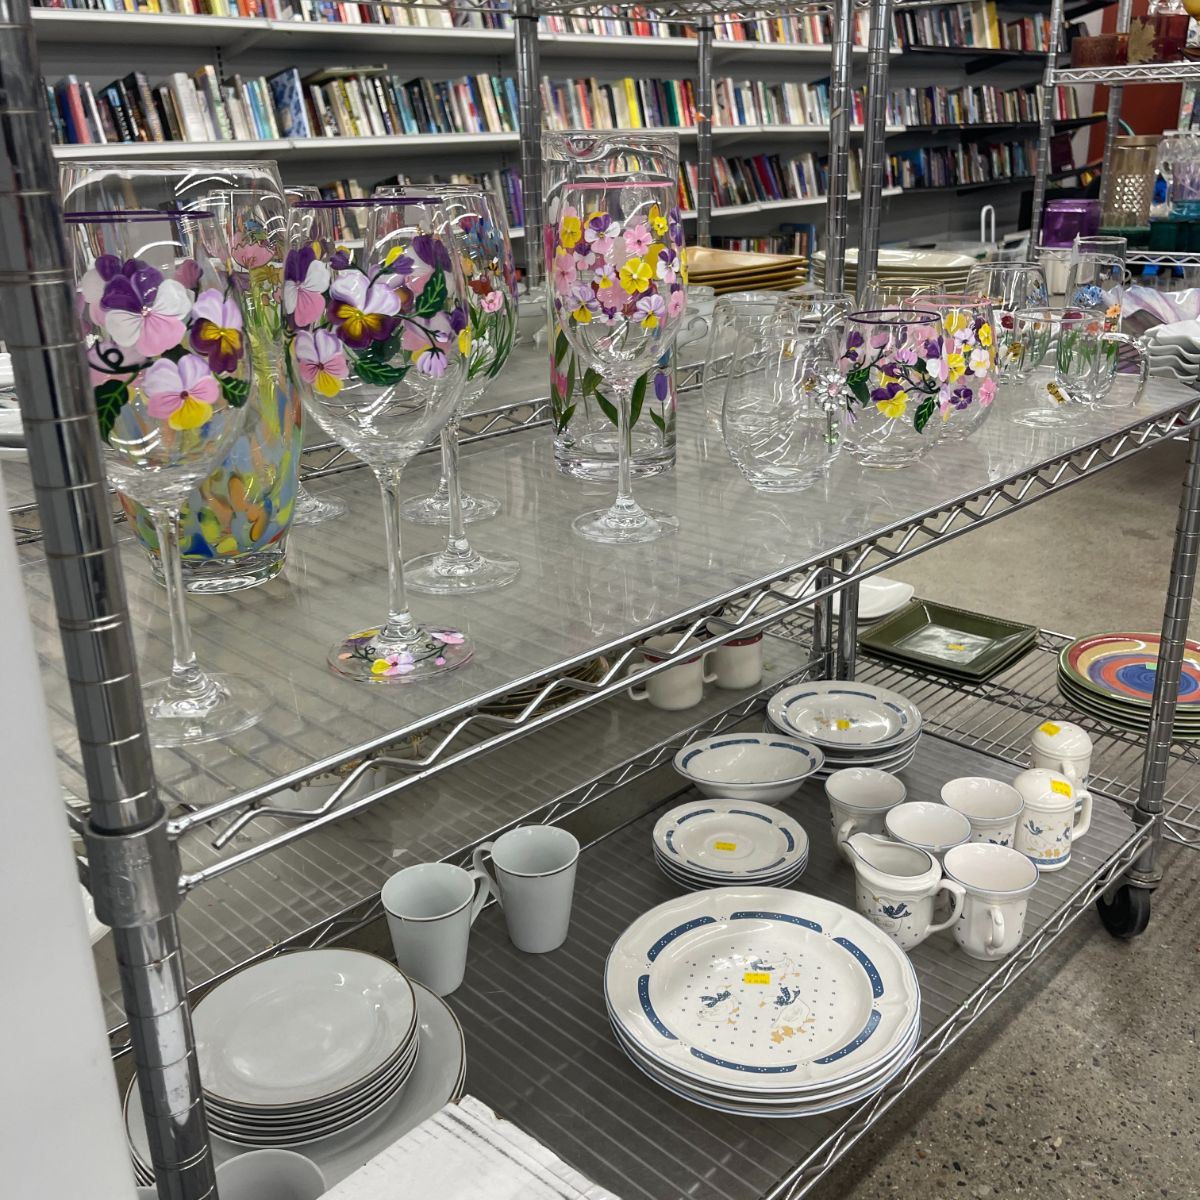 Now that spring is here, it's time for a glassware refresh! Don't you love these spring sets? Make sure to tag us in your #goodwillfinds tablescapes! #shopgoodwill #GoodwillMass